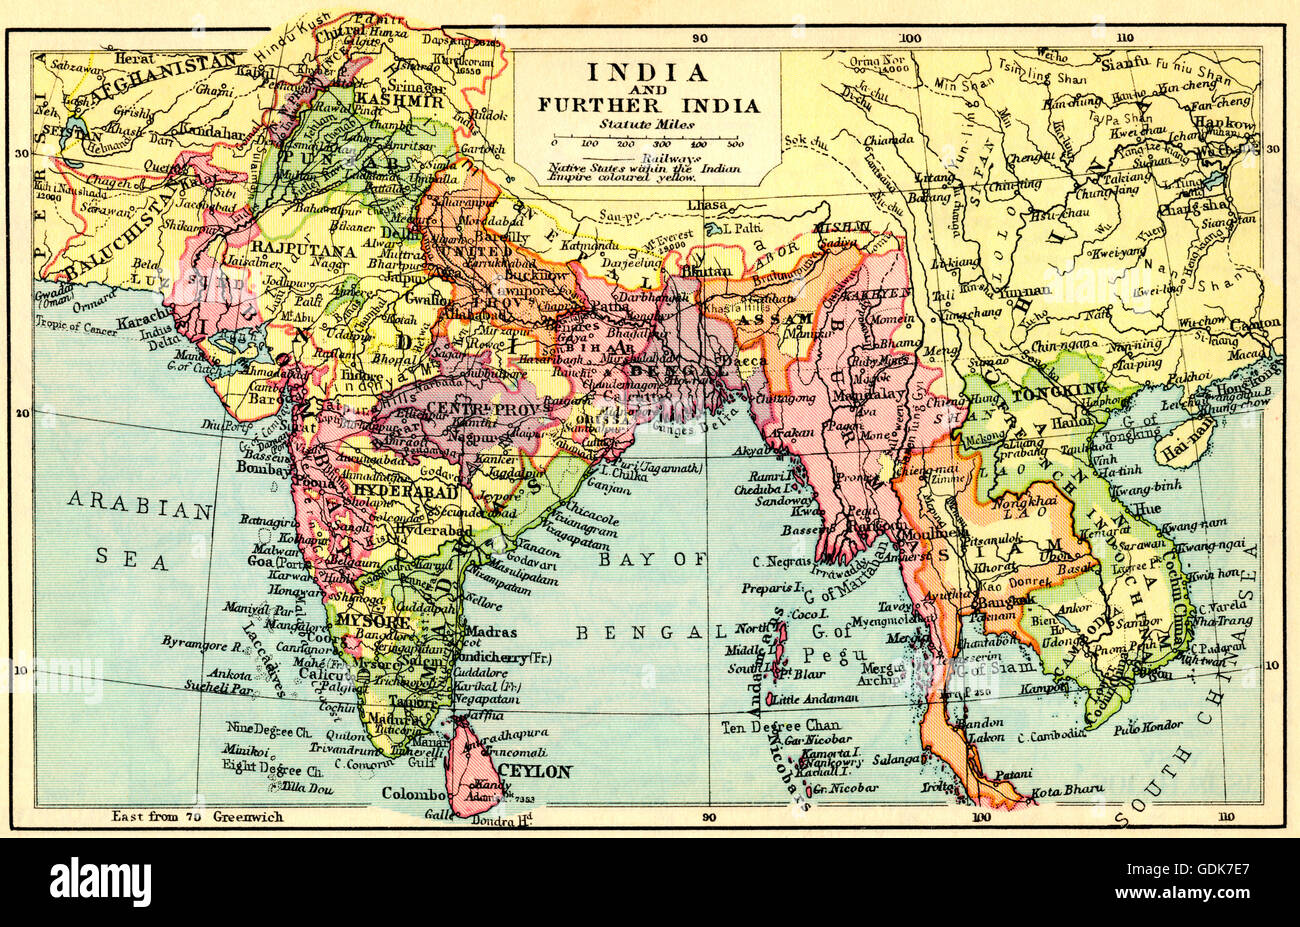 A 1930's map of India and Further India. Stock Photo